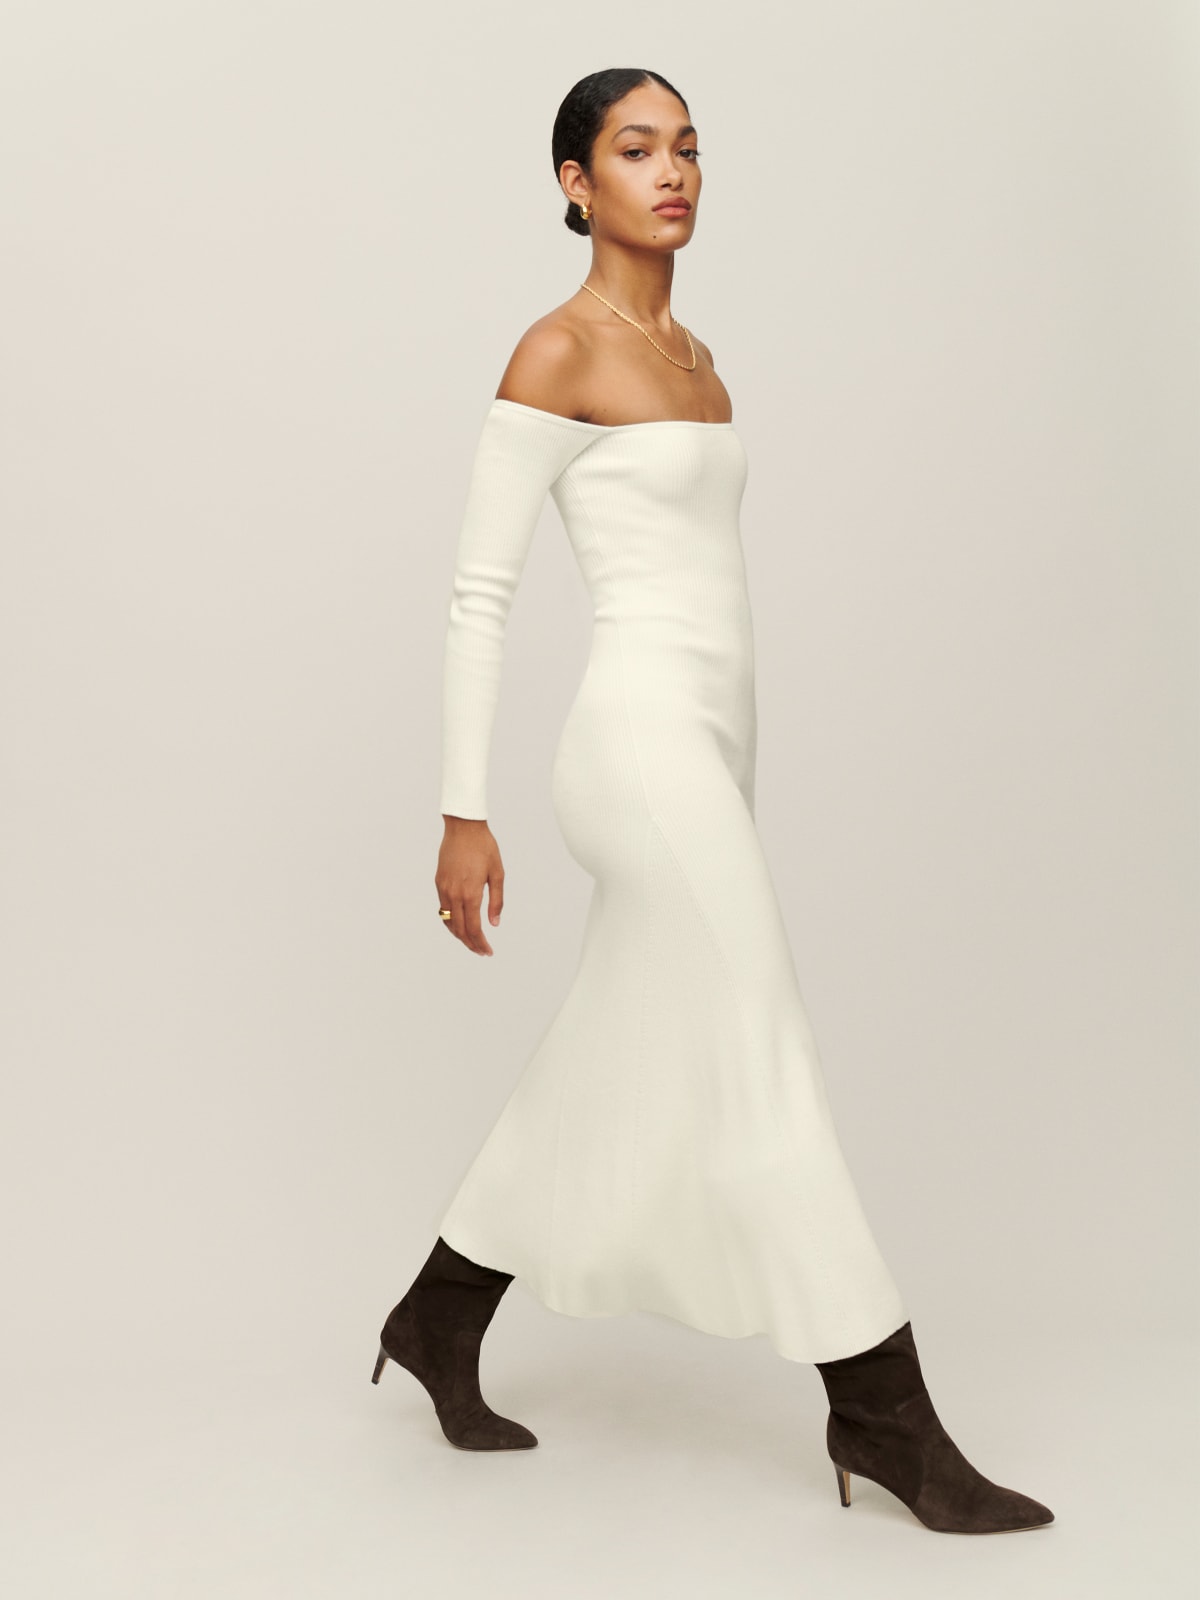 Reformation Symone dress in cream is an off the shoulder, fitted, knitted midi dress. It features long, fitted sleeves, a flared skirt, and can be worn day-to-night.